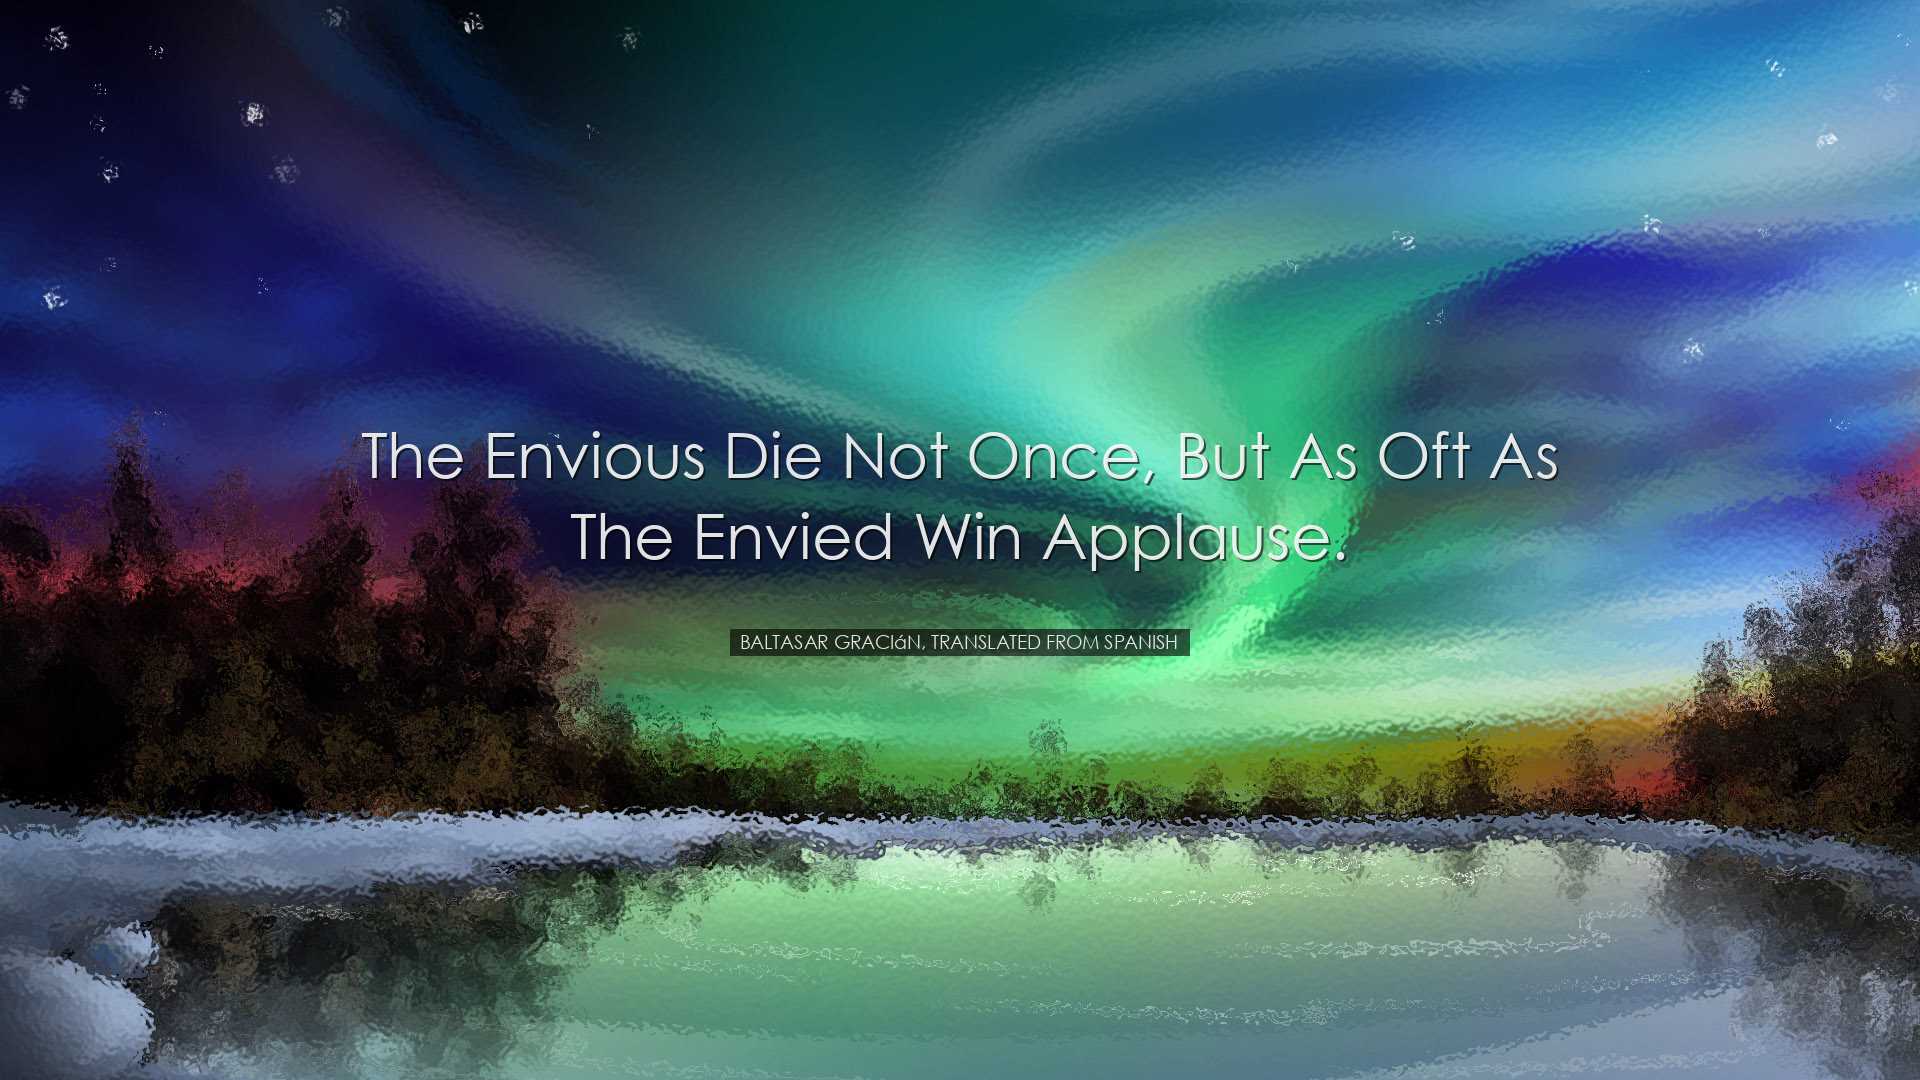 The envious die not once, but as oft as the envied win applause. -